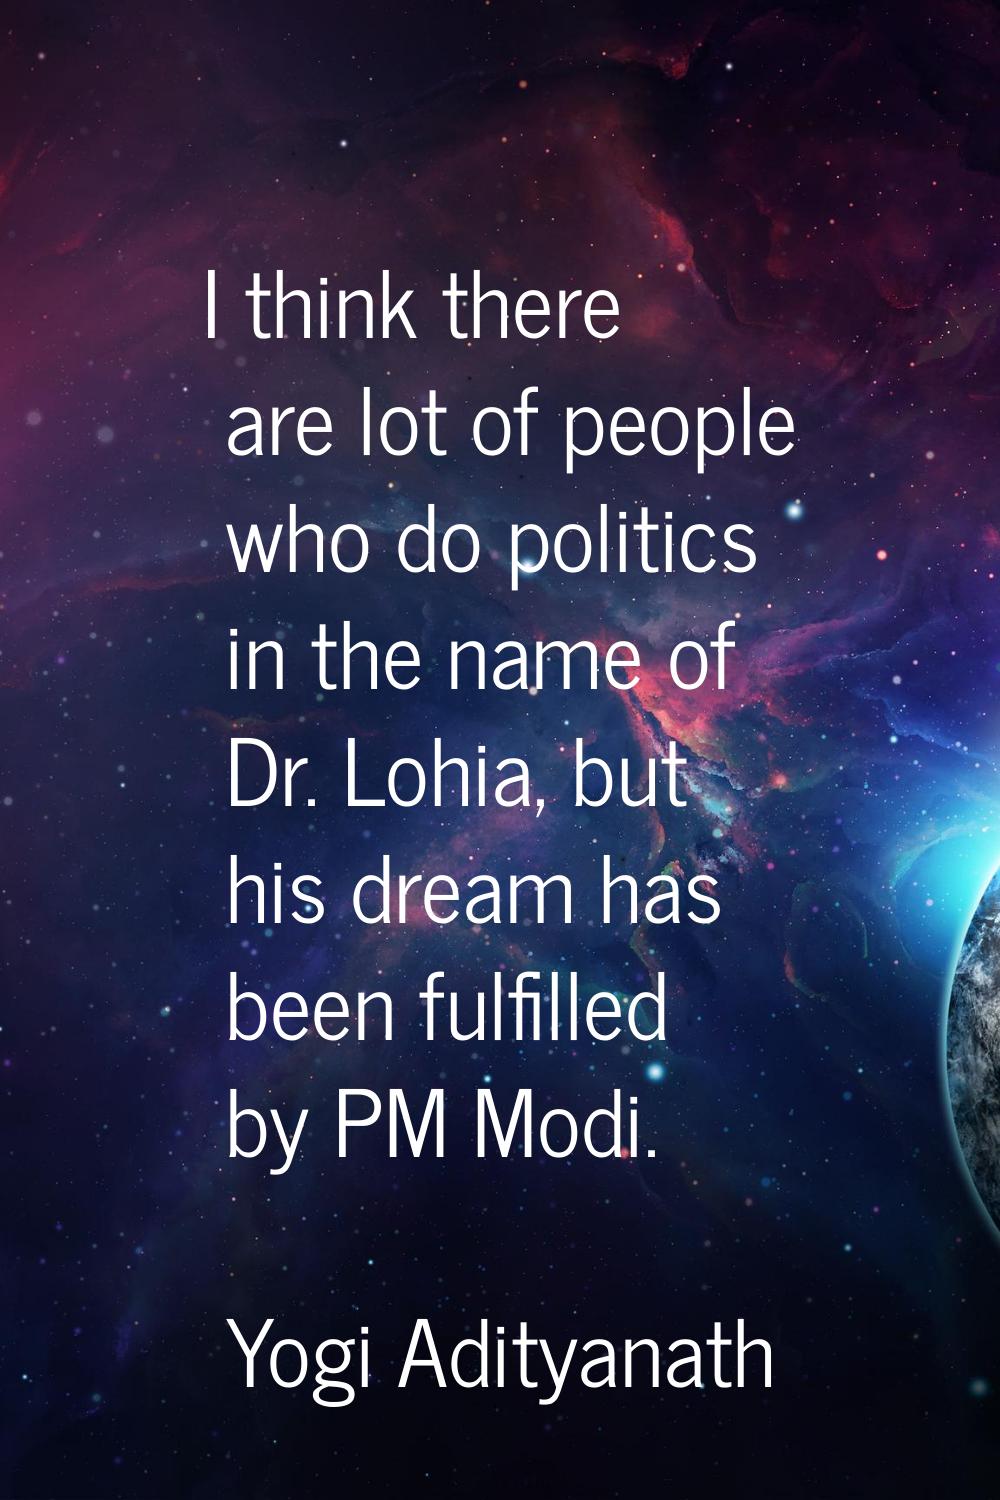 I think there are lot of people who do politics in the name of Dr. Lohia, but his dream has been fu